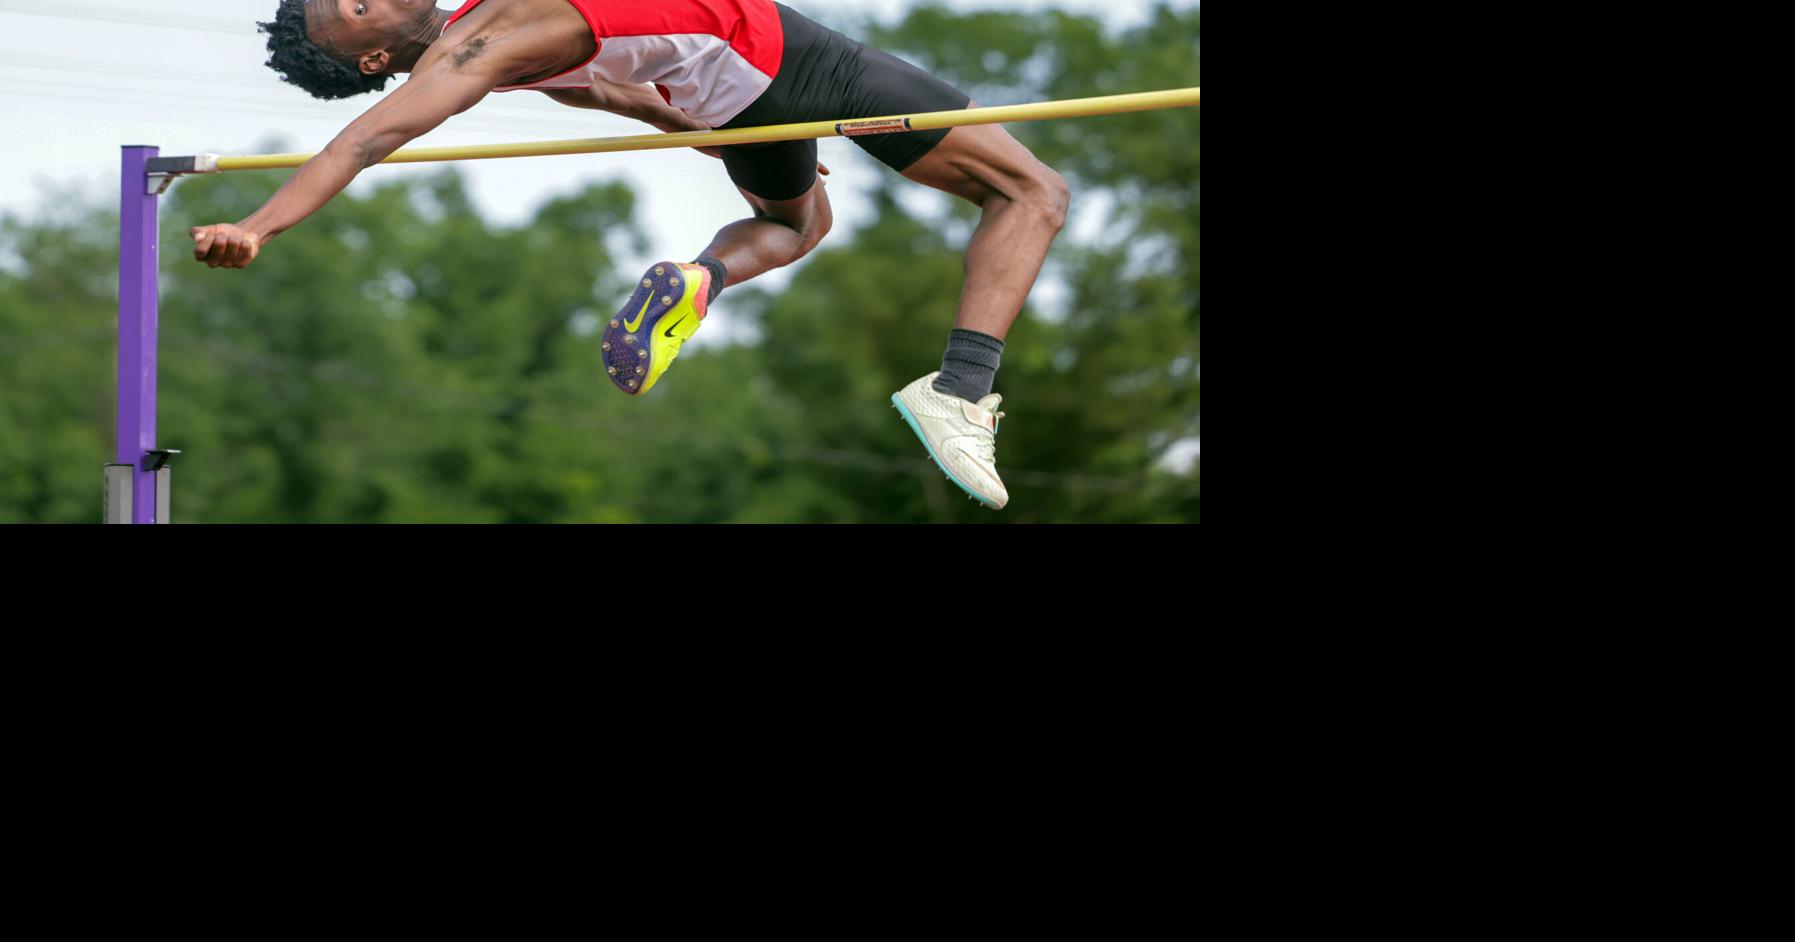 John Curtis Senior Kyron Sumler Sets New State Record in High Jump at 7 Feet – LHSAA Track and Field Update